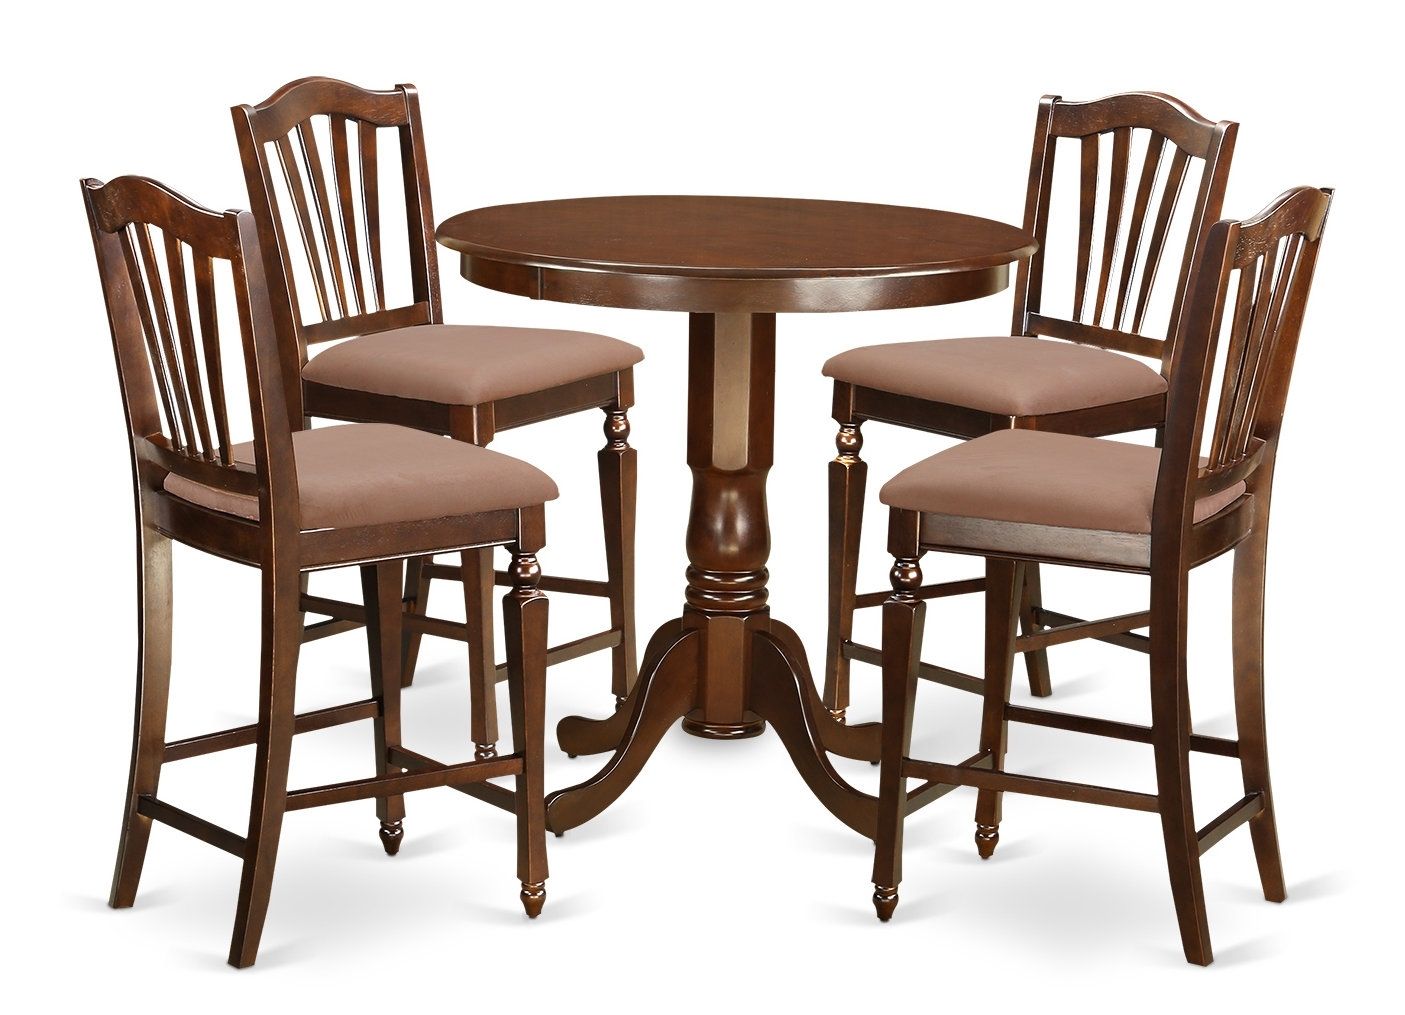 East West Jackson 5 Piece Counter Height Pub Table Set | Wayfair Pertaining To 2018 Jaxon Grey 5 Piece Extension Counter Sets With Fabric Stools (View 13 of 20)